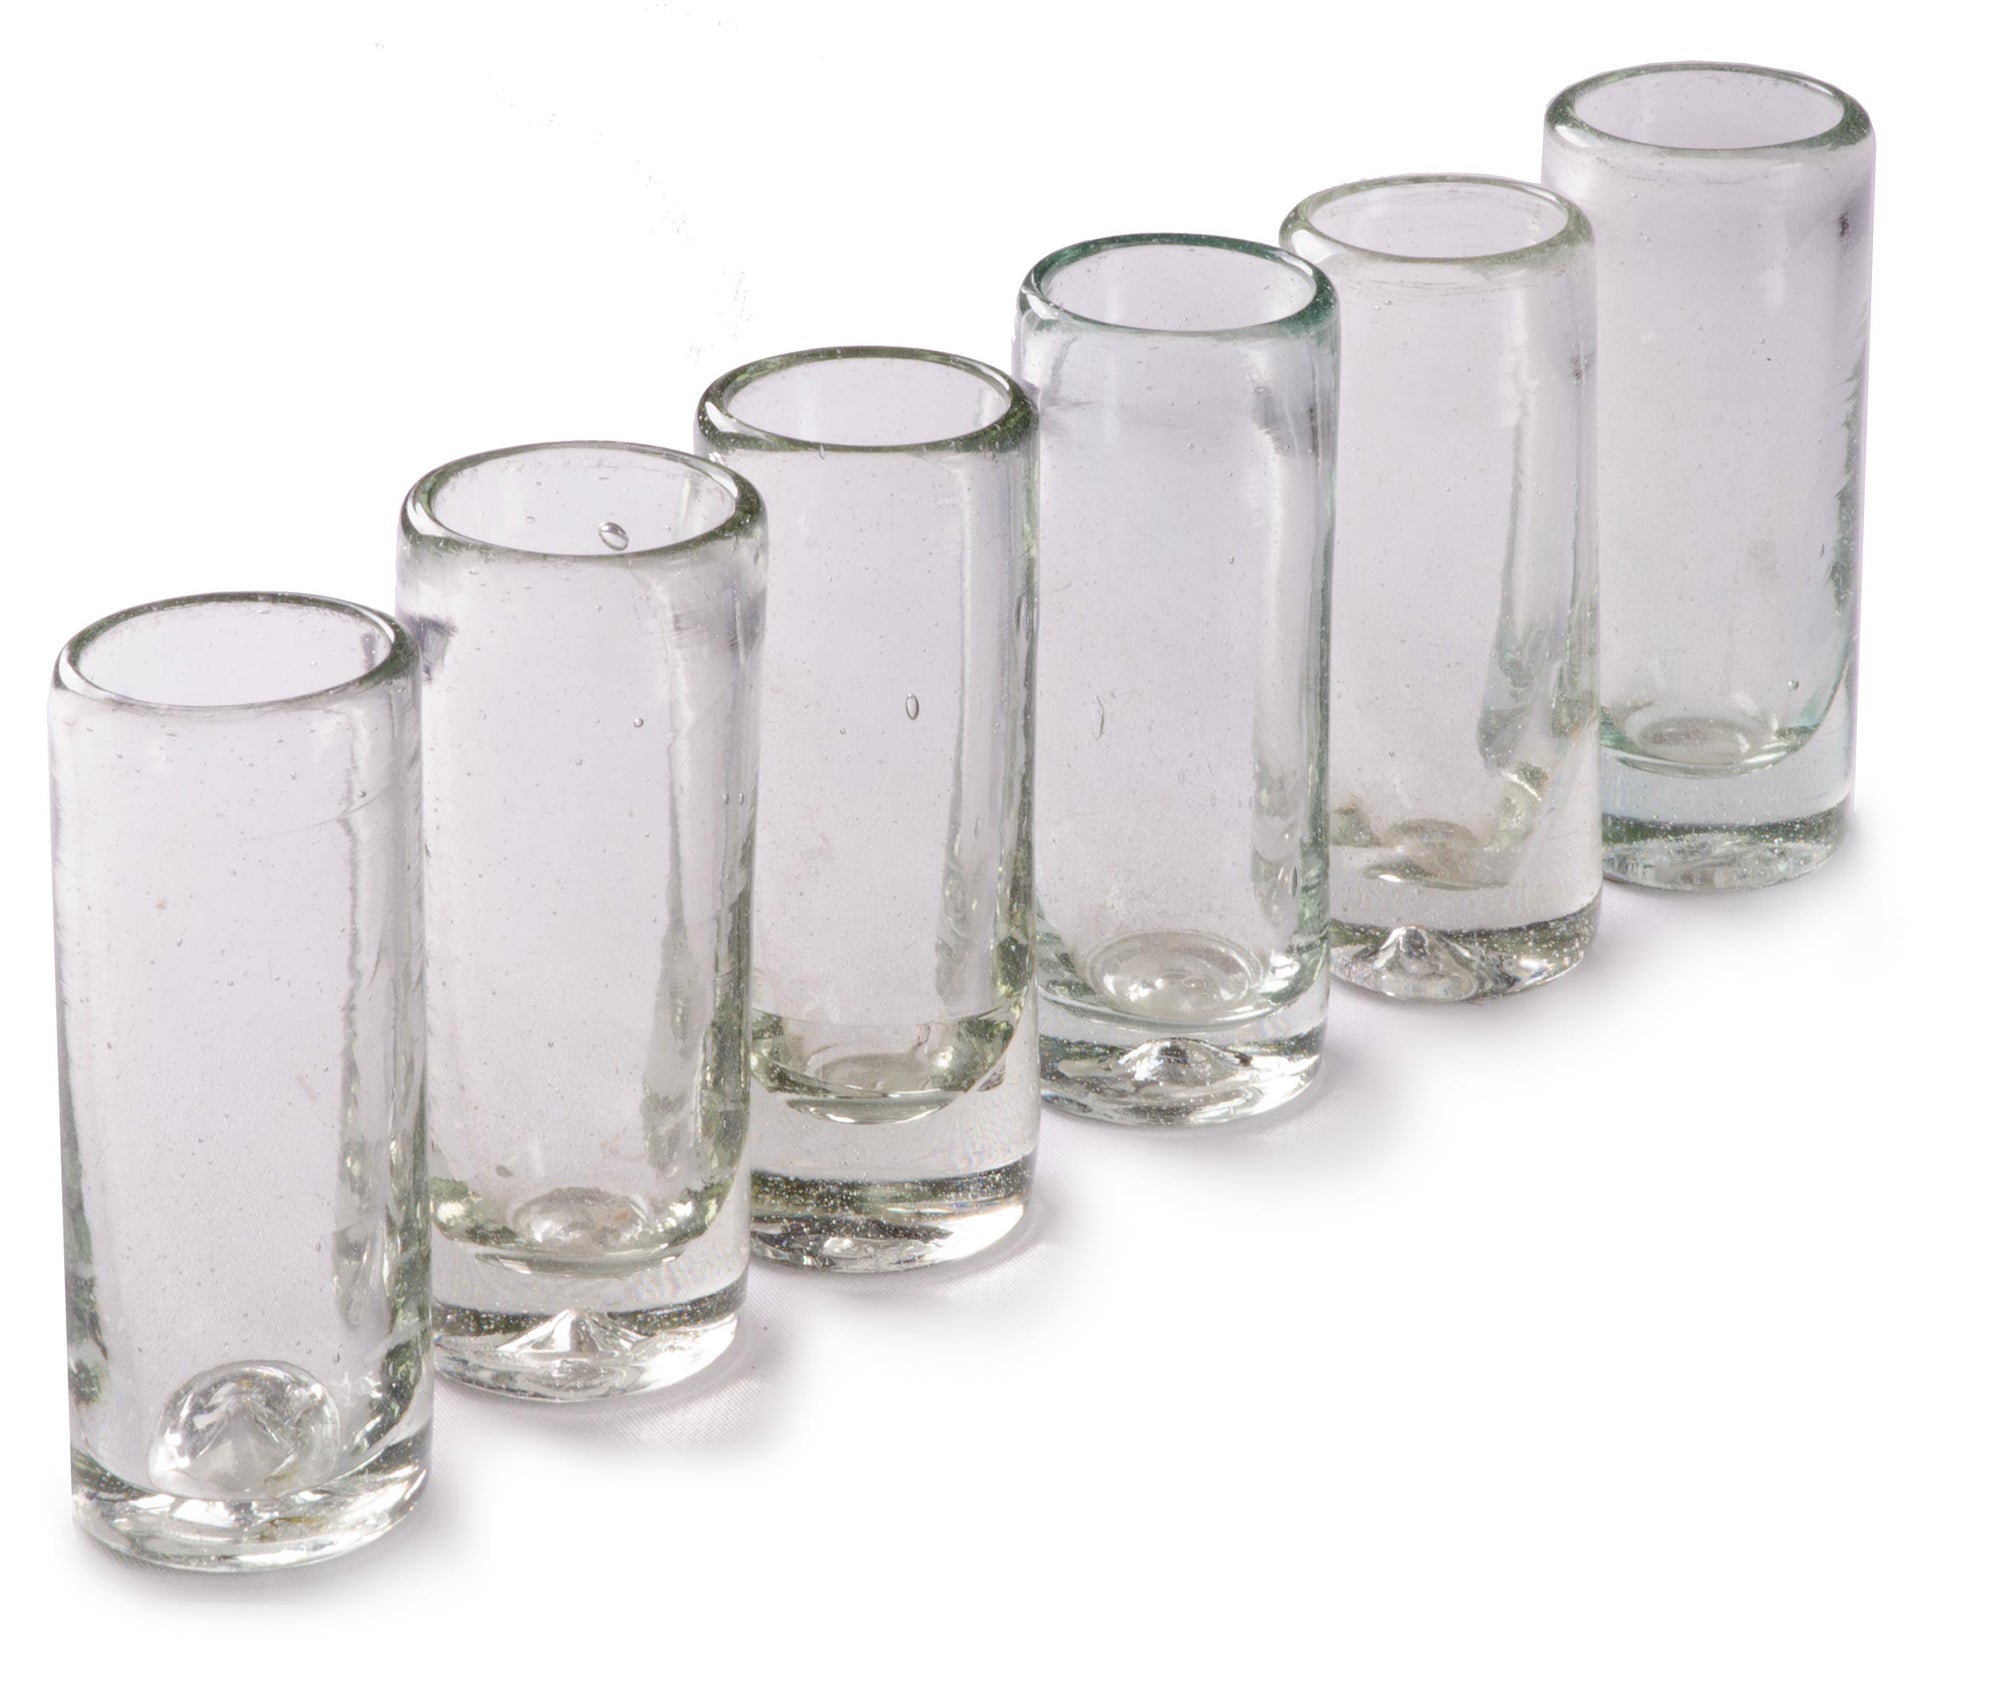 Orion Natural 2 oz Shot Glass - Set of 6 - Orion's Table Mexican Glassware